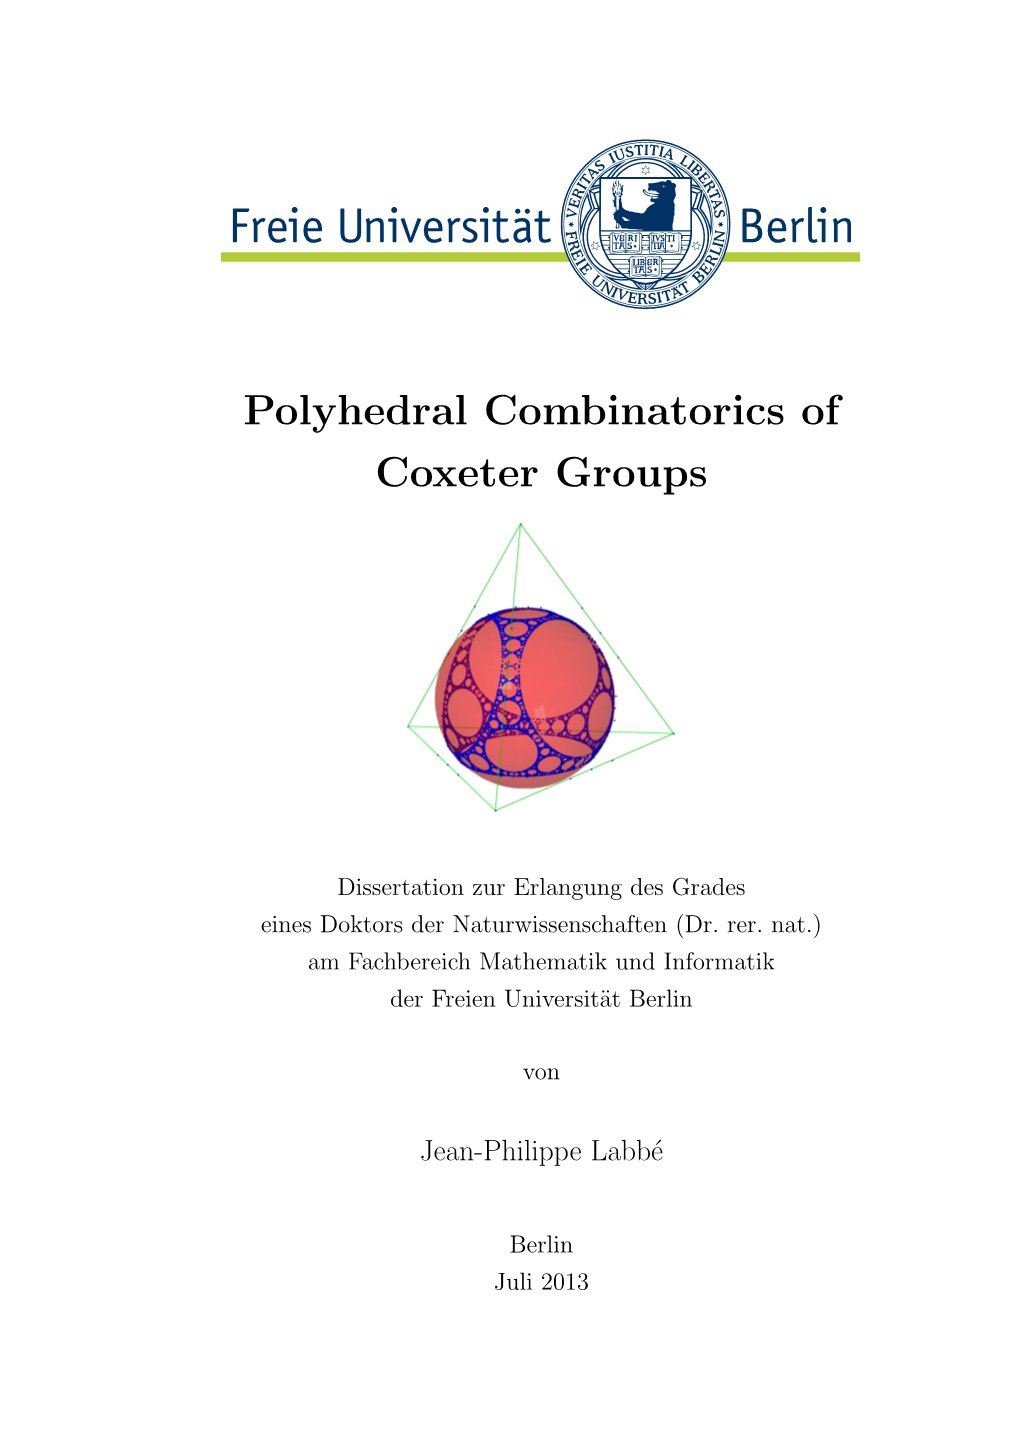 Polyhedral Combinatorics of Coxeter Groups